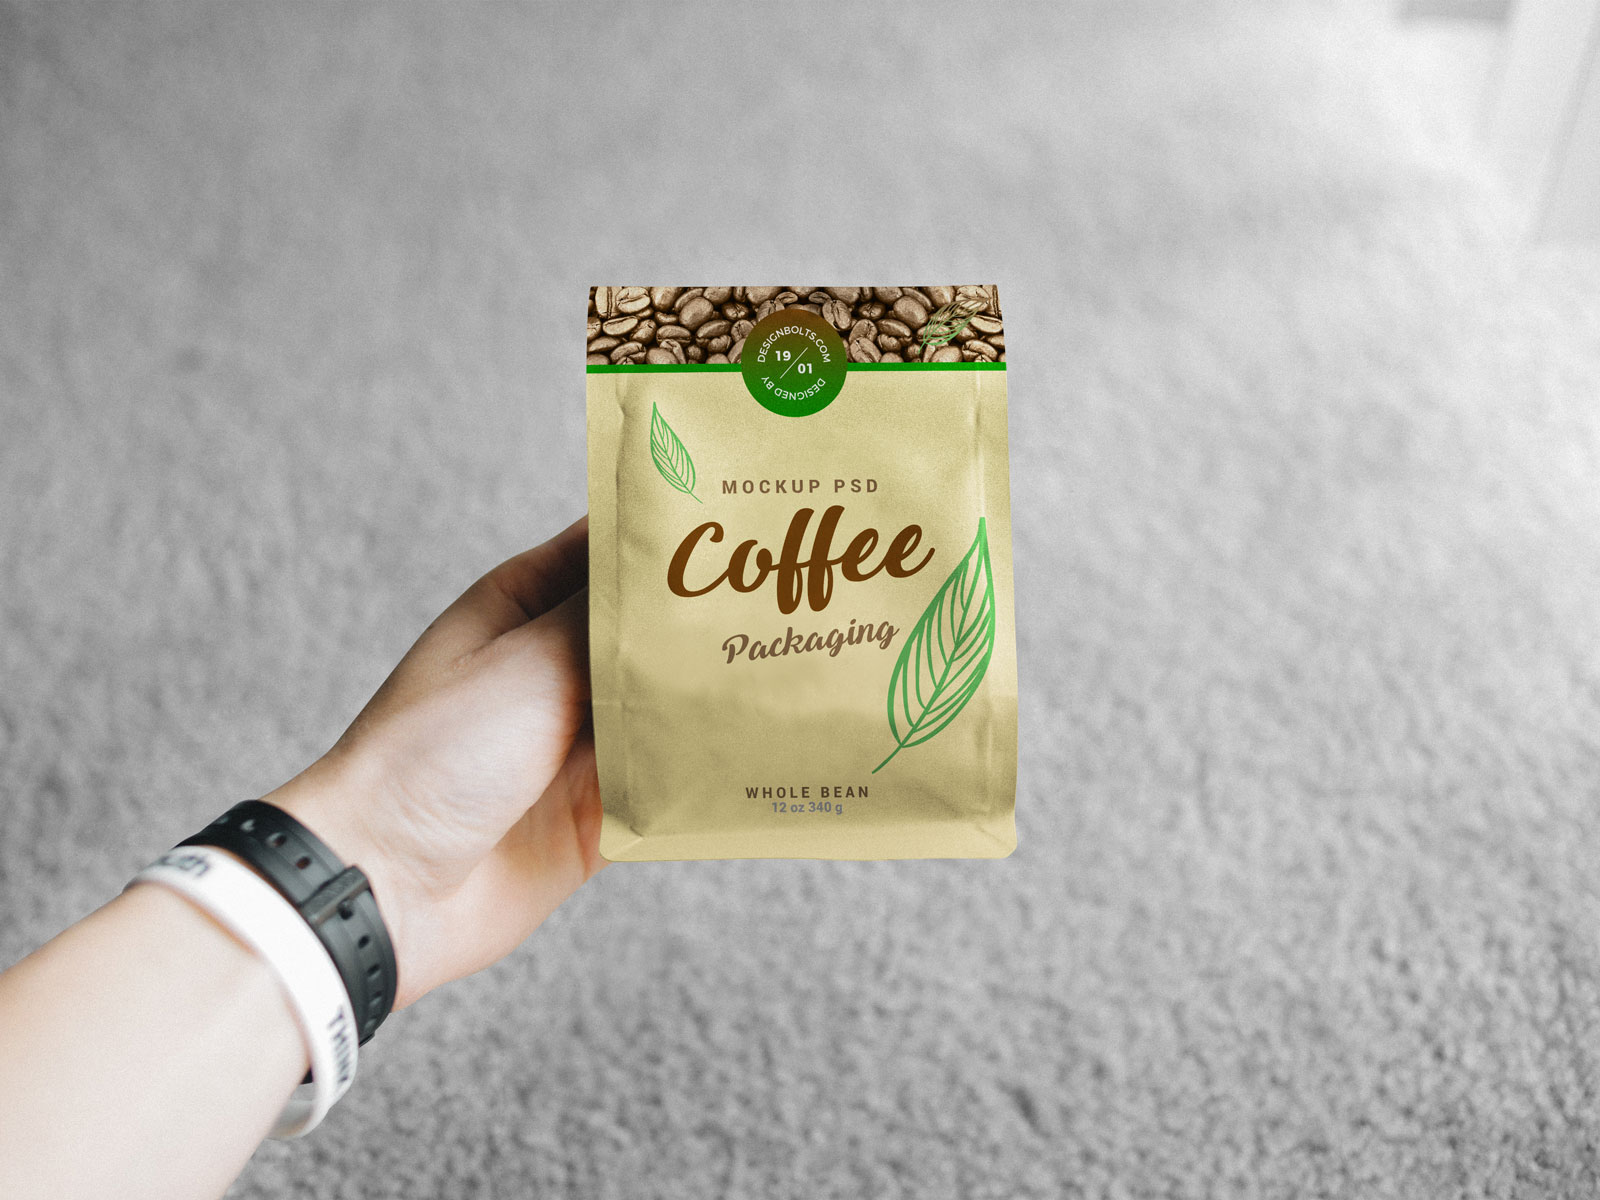 Free-Hand-Holding-Coffee-Packaging-Mockup-PSD